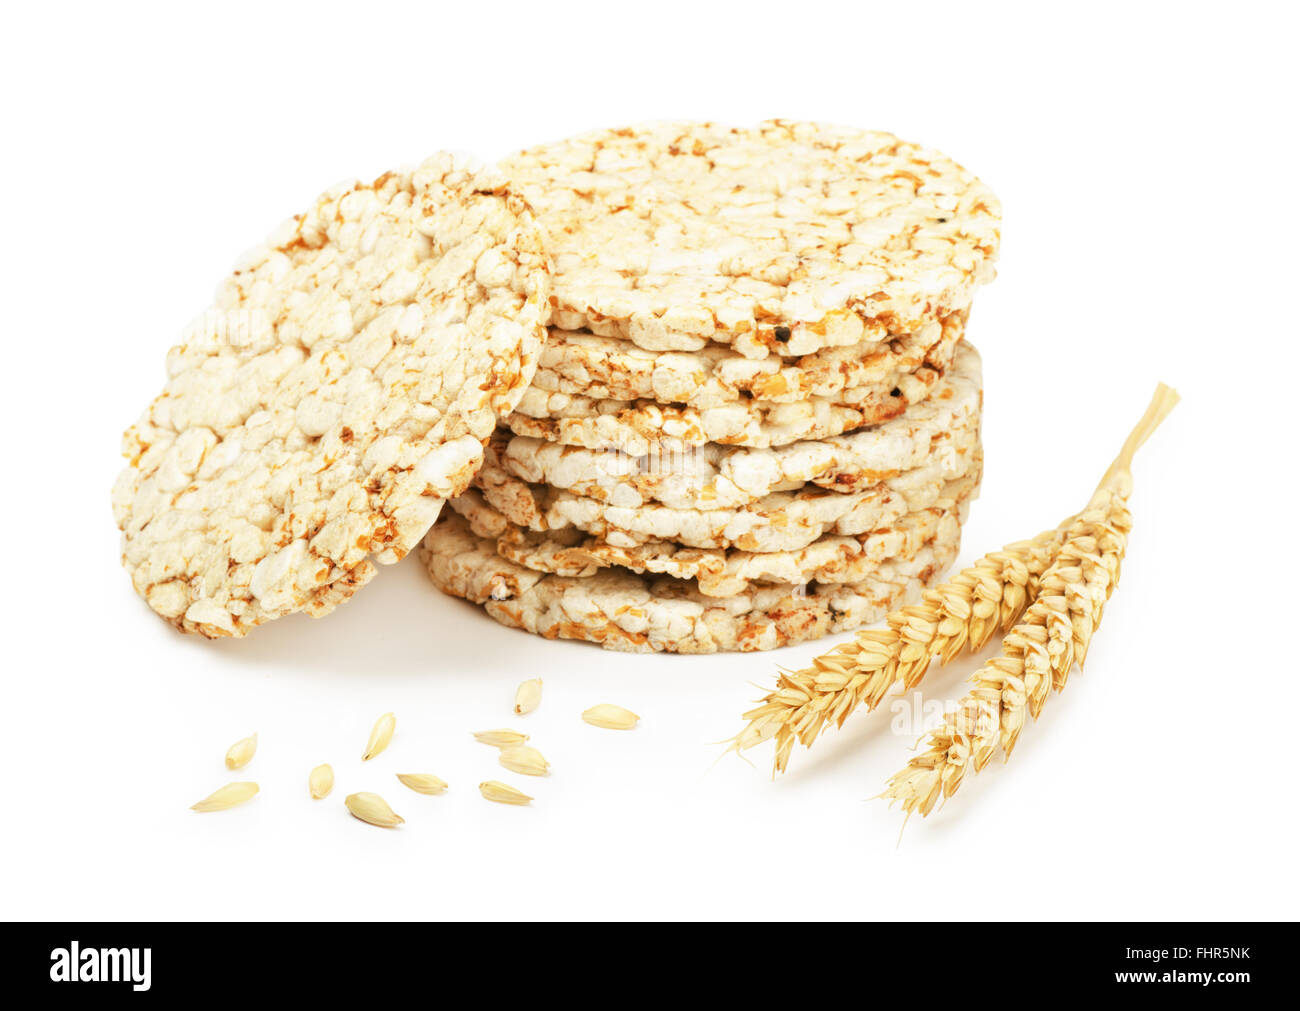 Grain crispbread with wheat isolated on white background Stock Photo